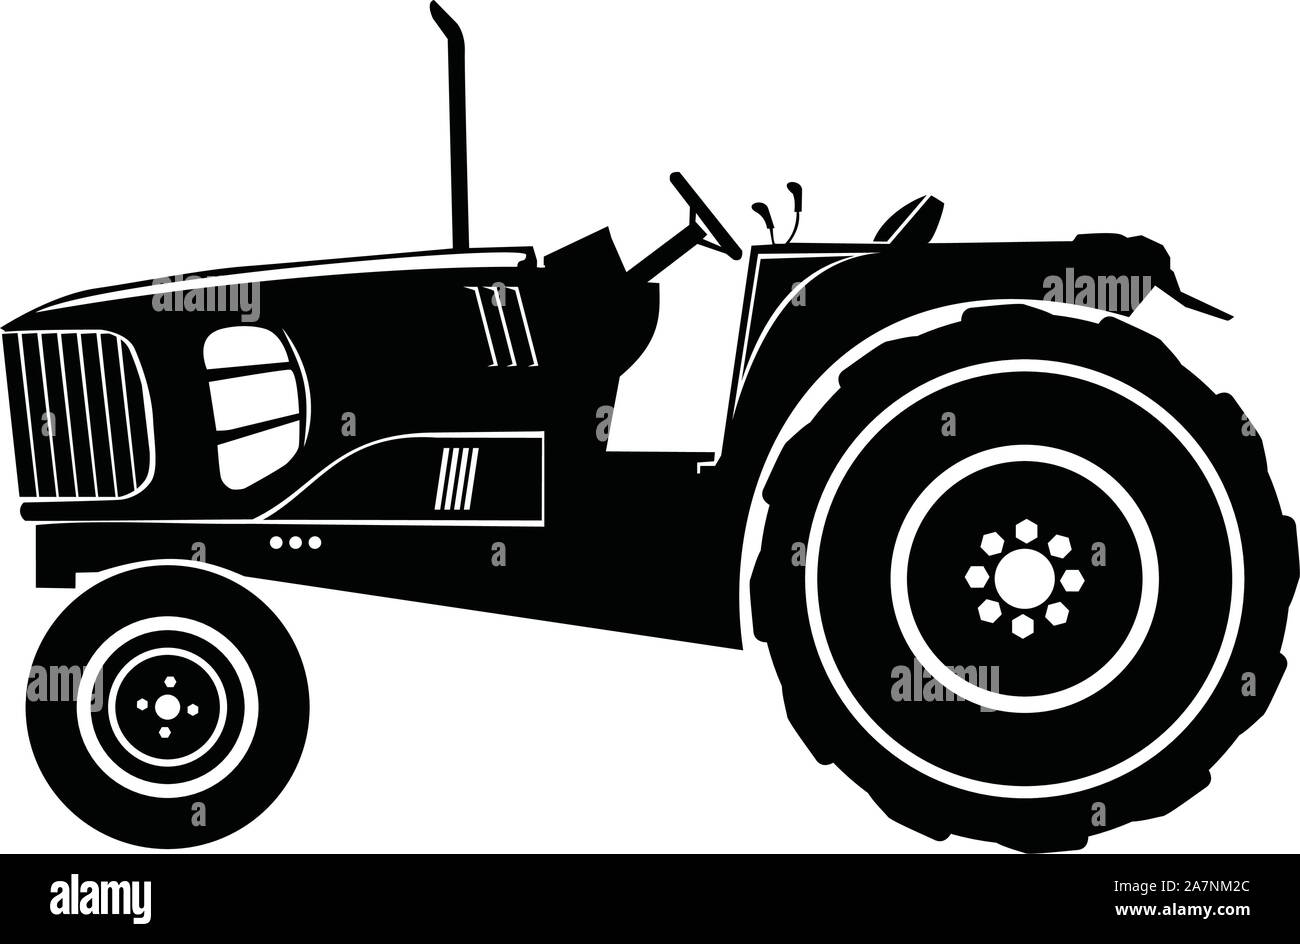 tractor silhouette for agricultural equipment Stock Vector